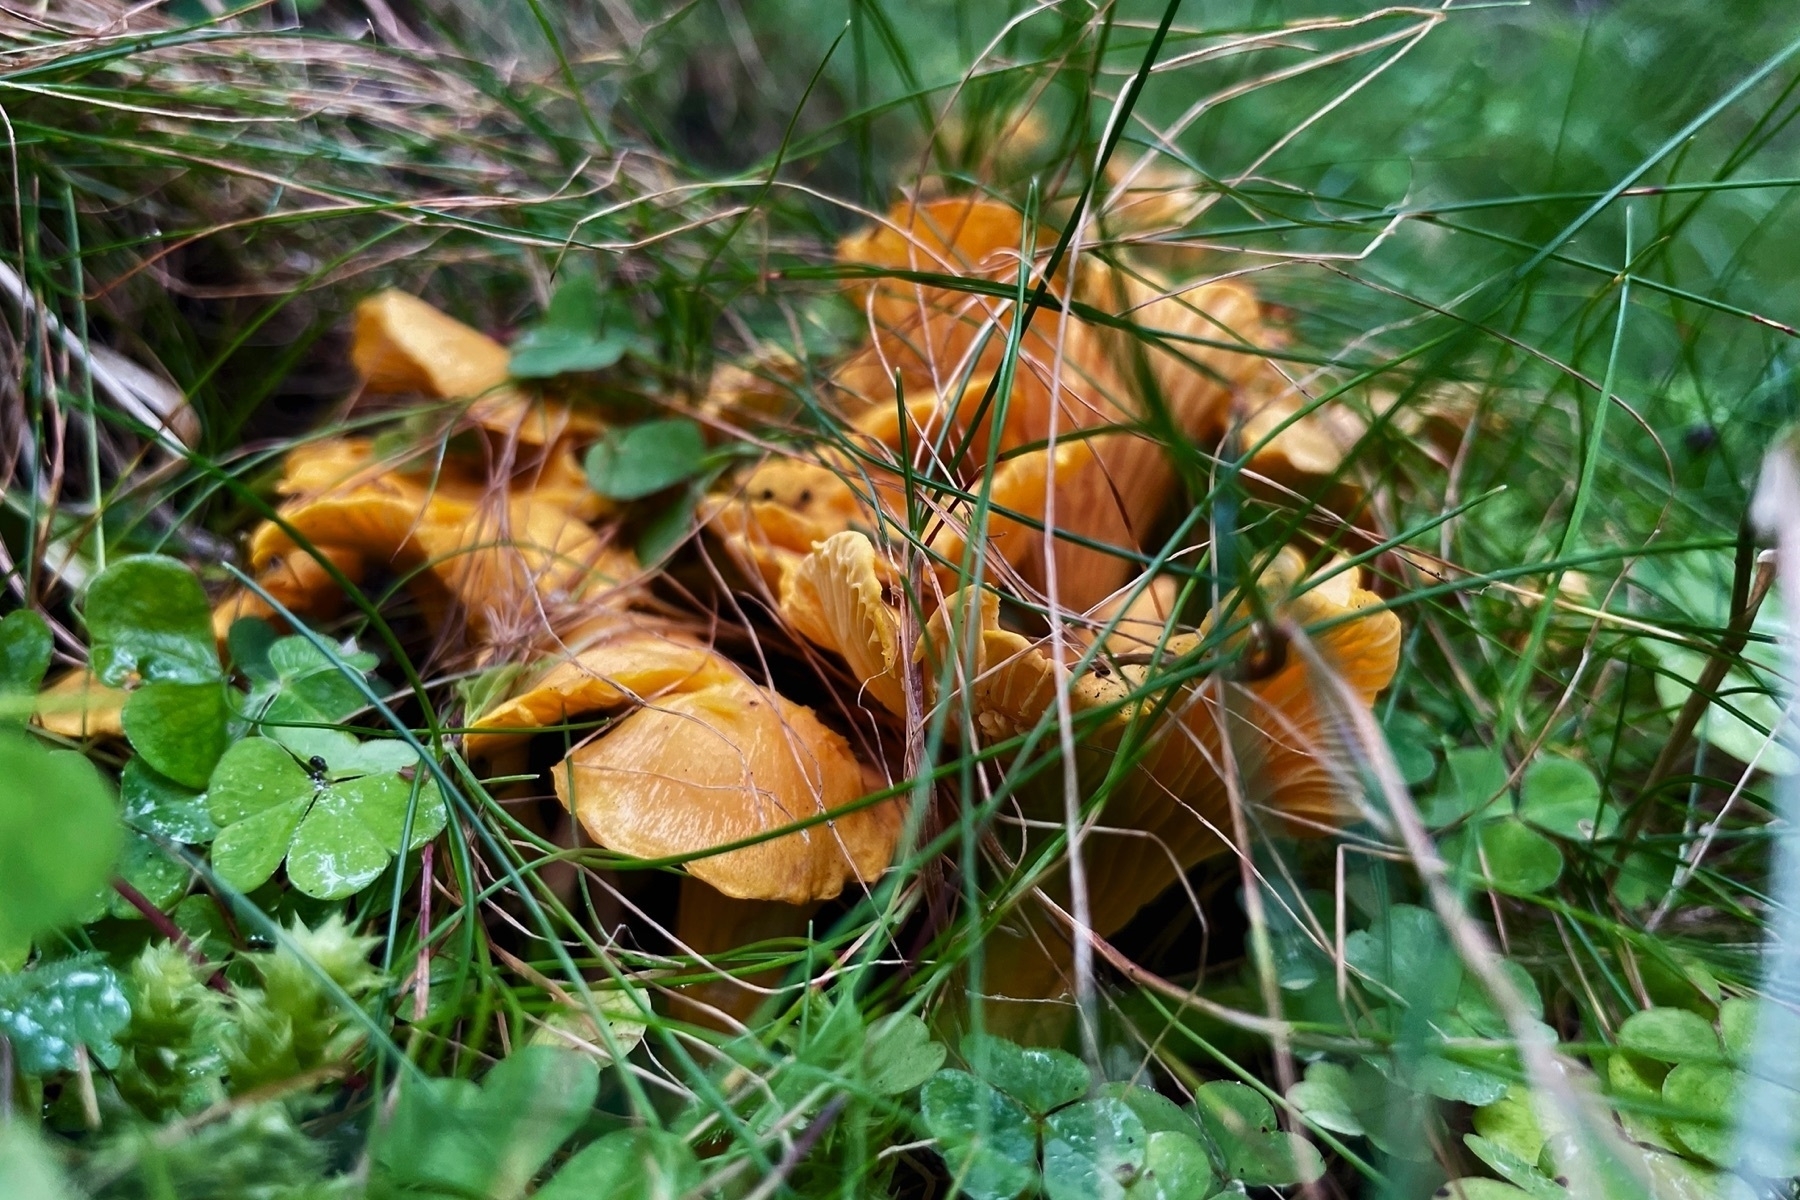 A couple of chanterelle mushrooms growing between some grass